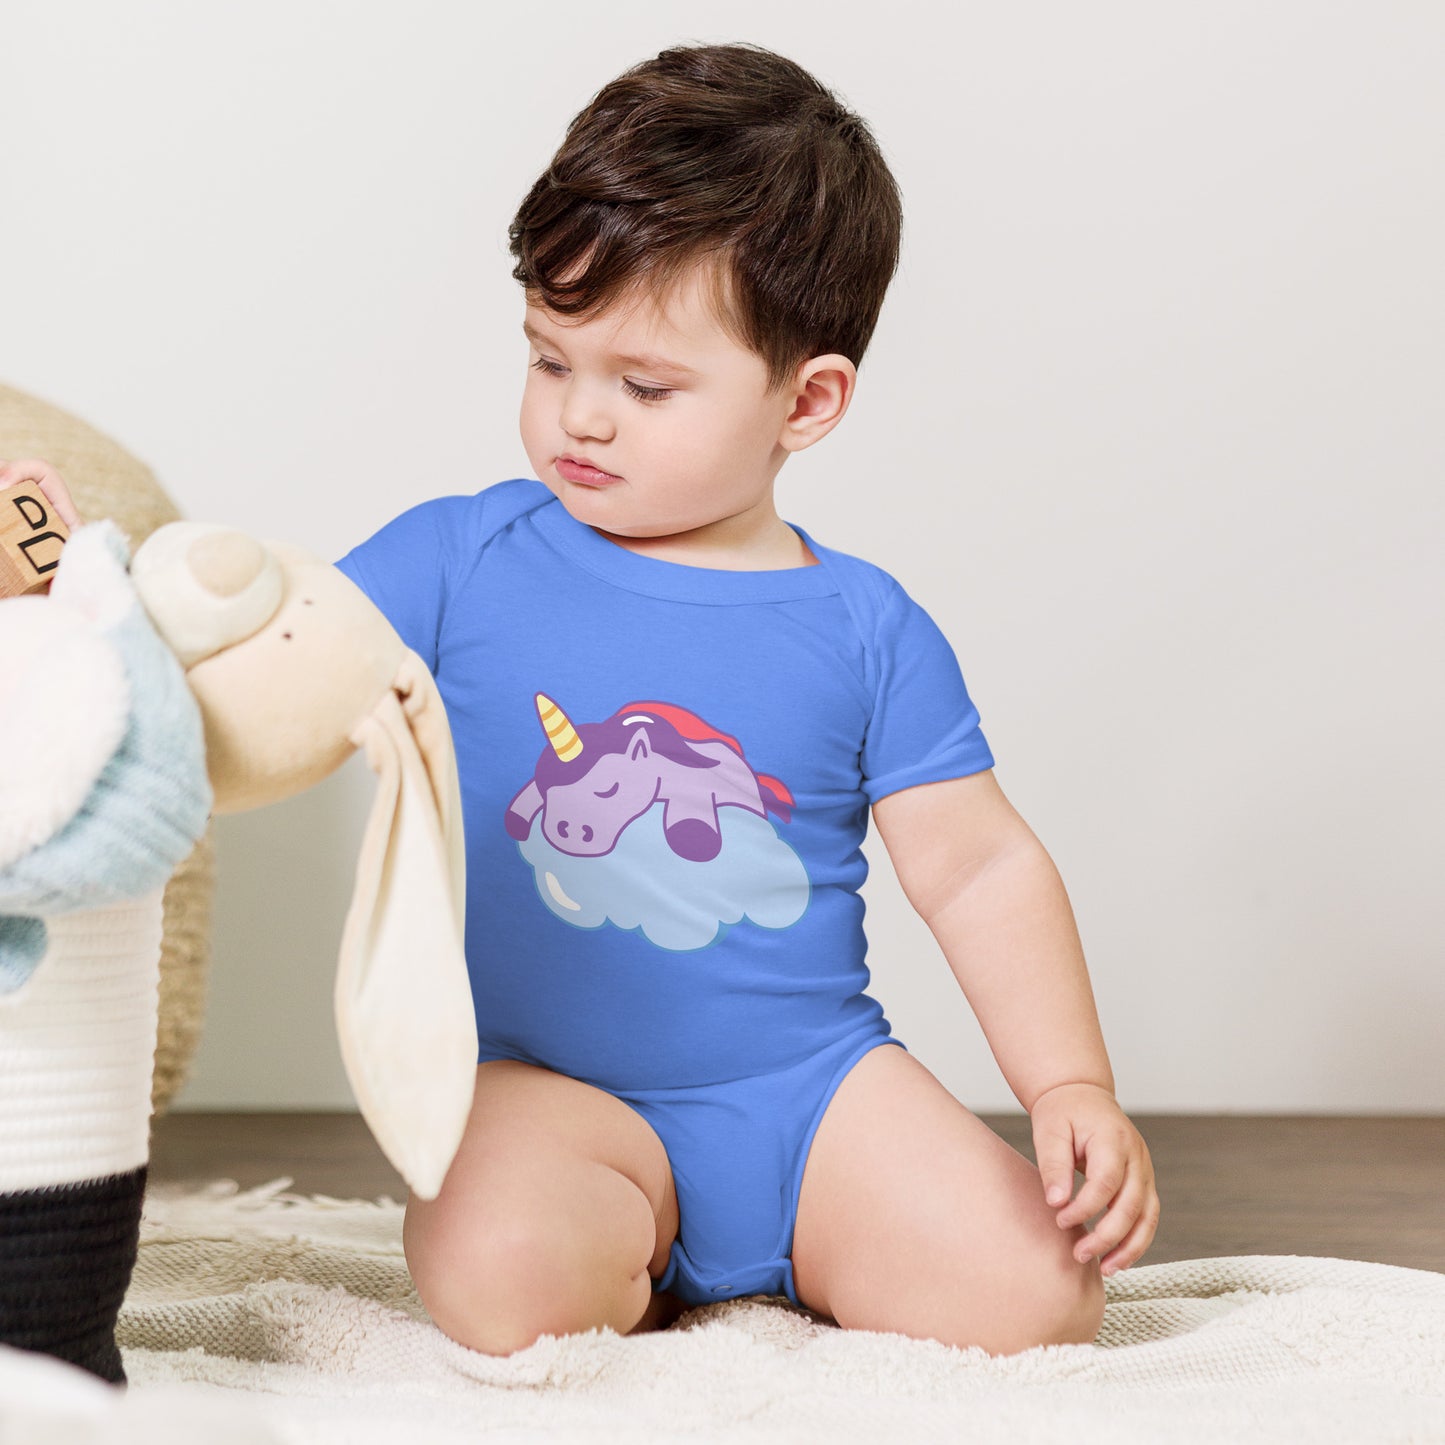 baby with a columbia blue bodysuit with a print of a sleeping unicorn on a cloud